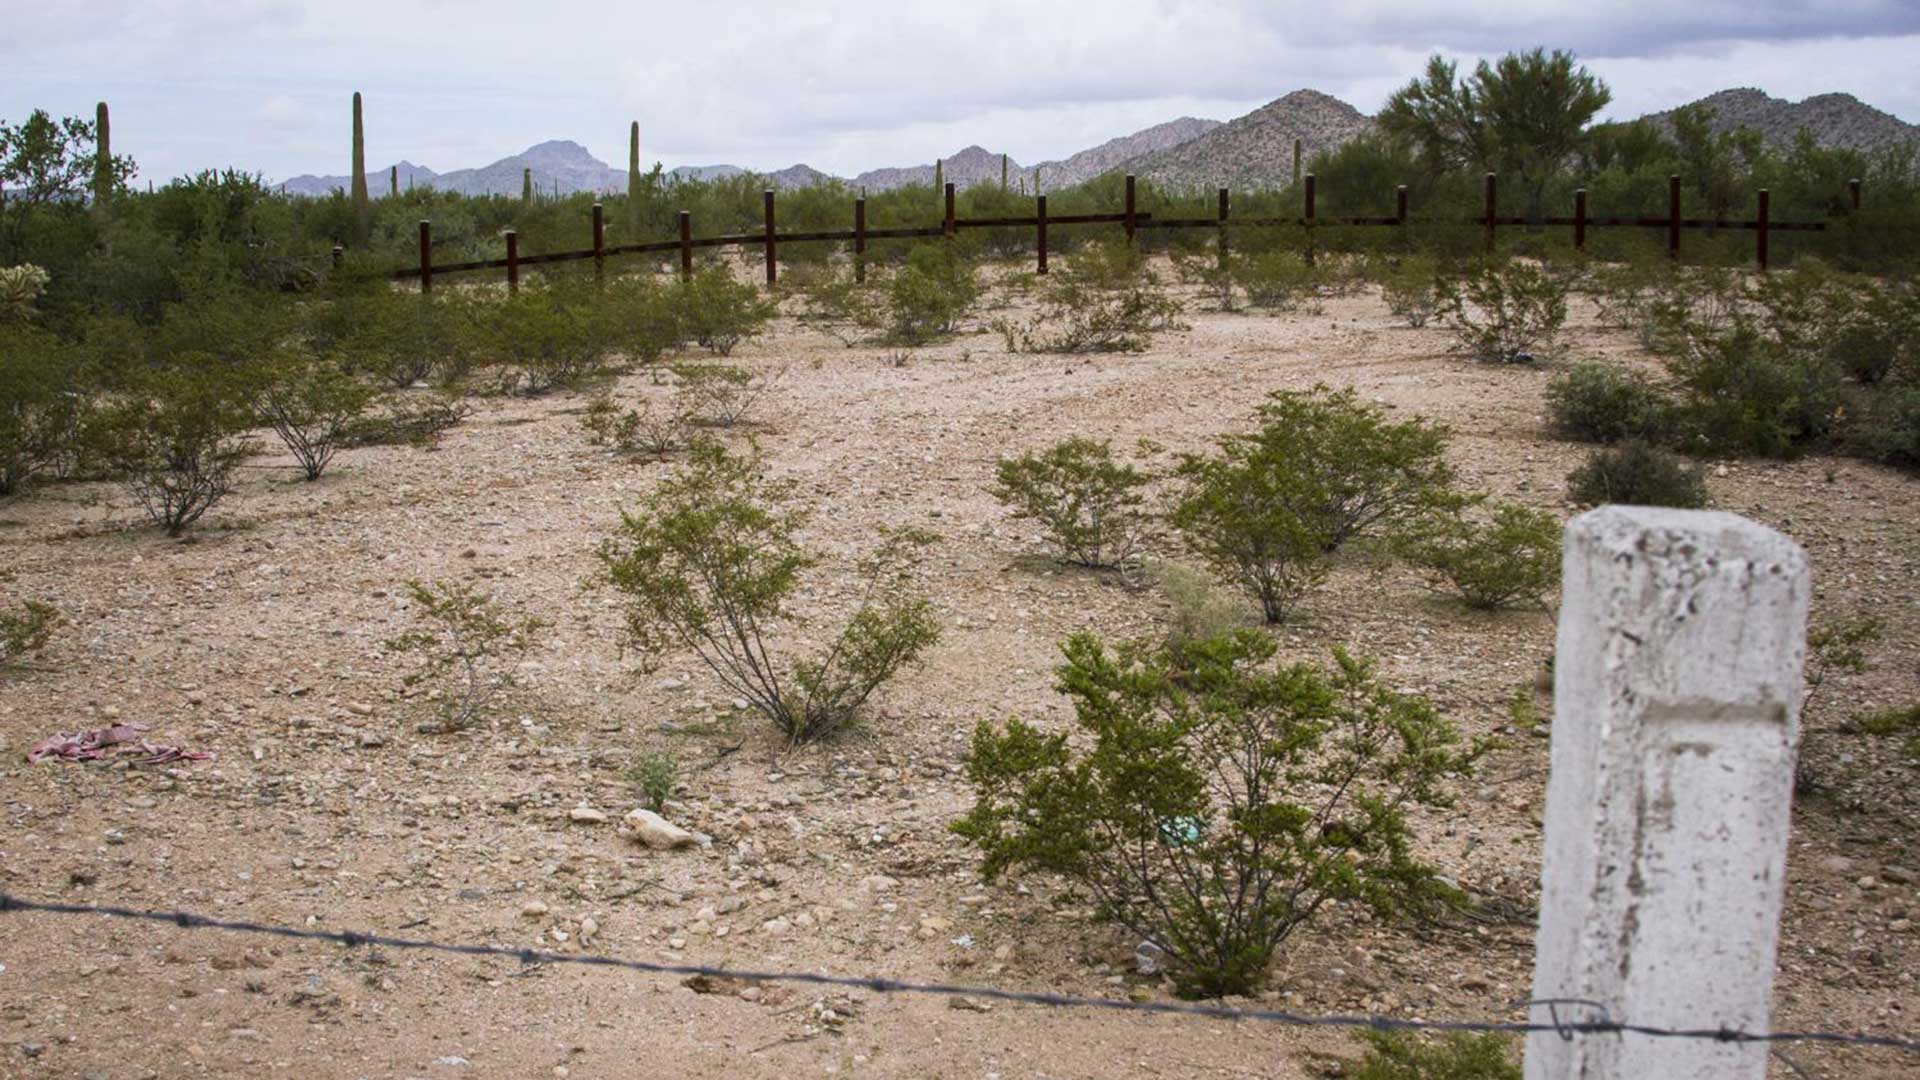 Vehicle barriers form the border west of Sonoyta, Sonora, south of Organ Pipe Cactus National Monument.
